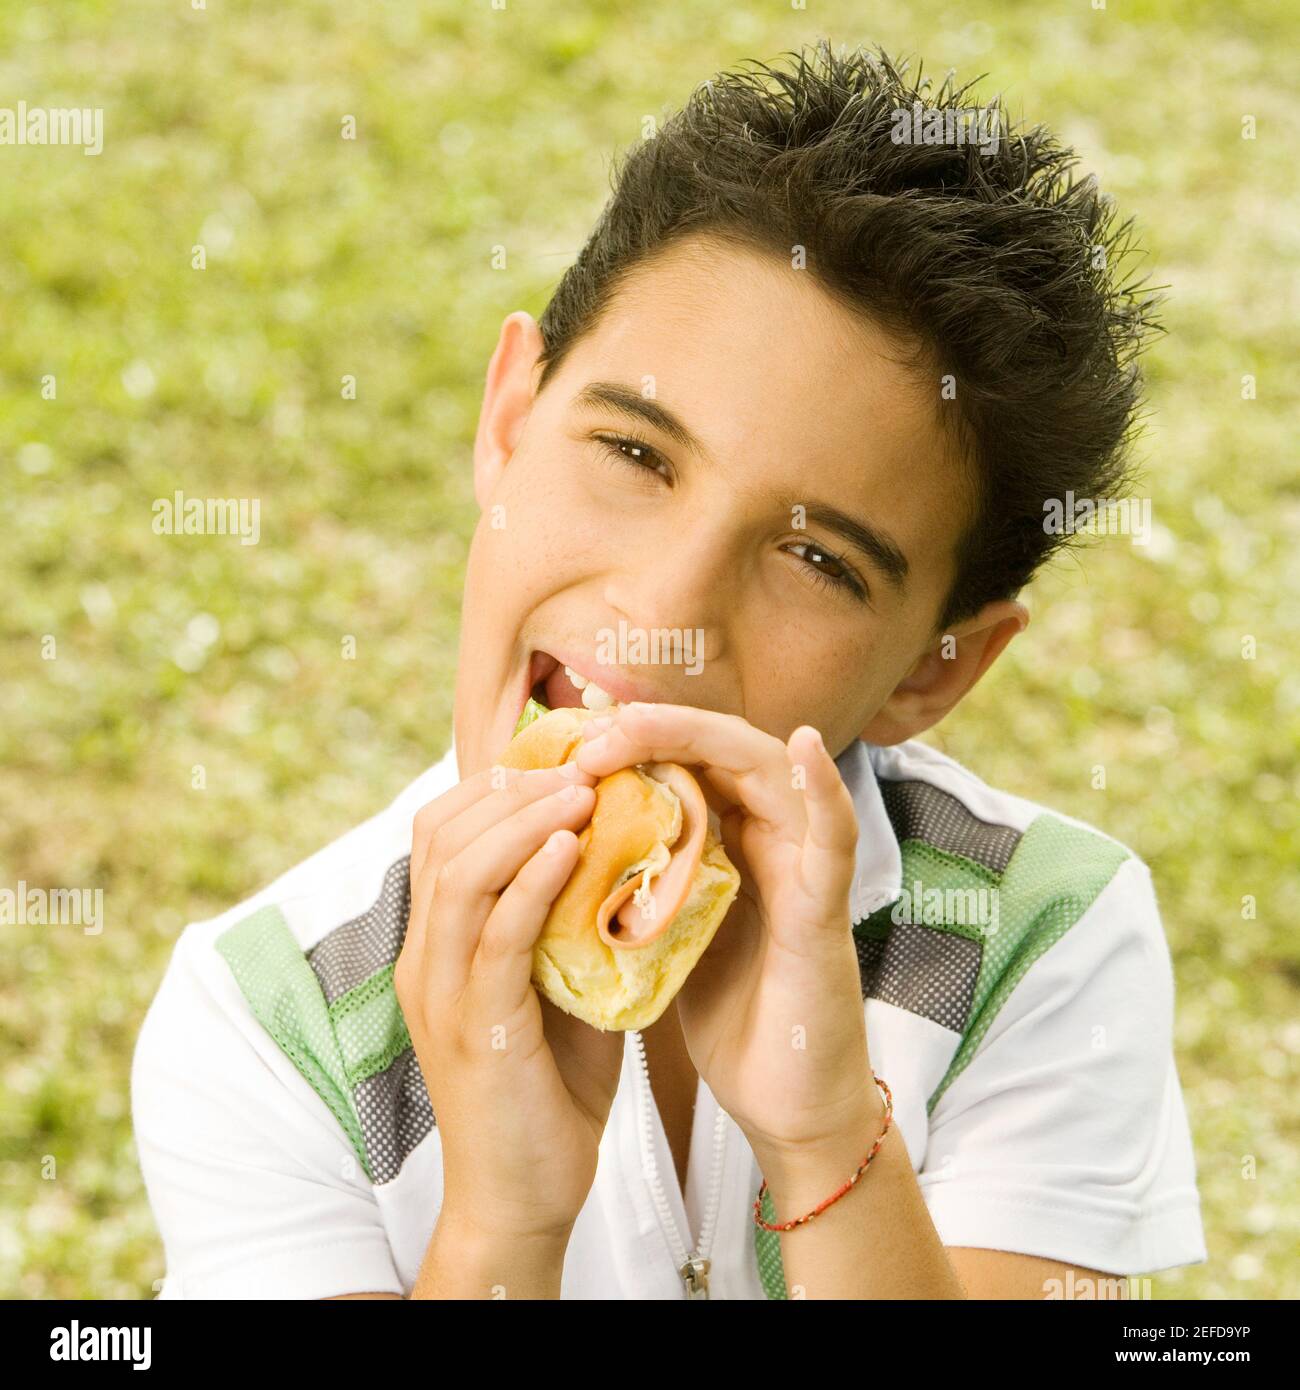 Portrait of a boy eating a burger Stock Photo